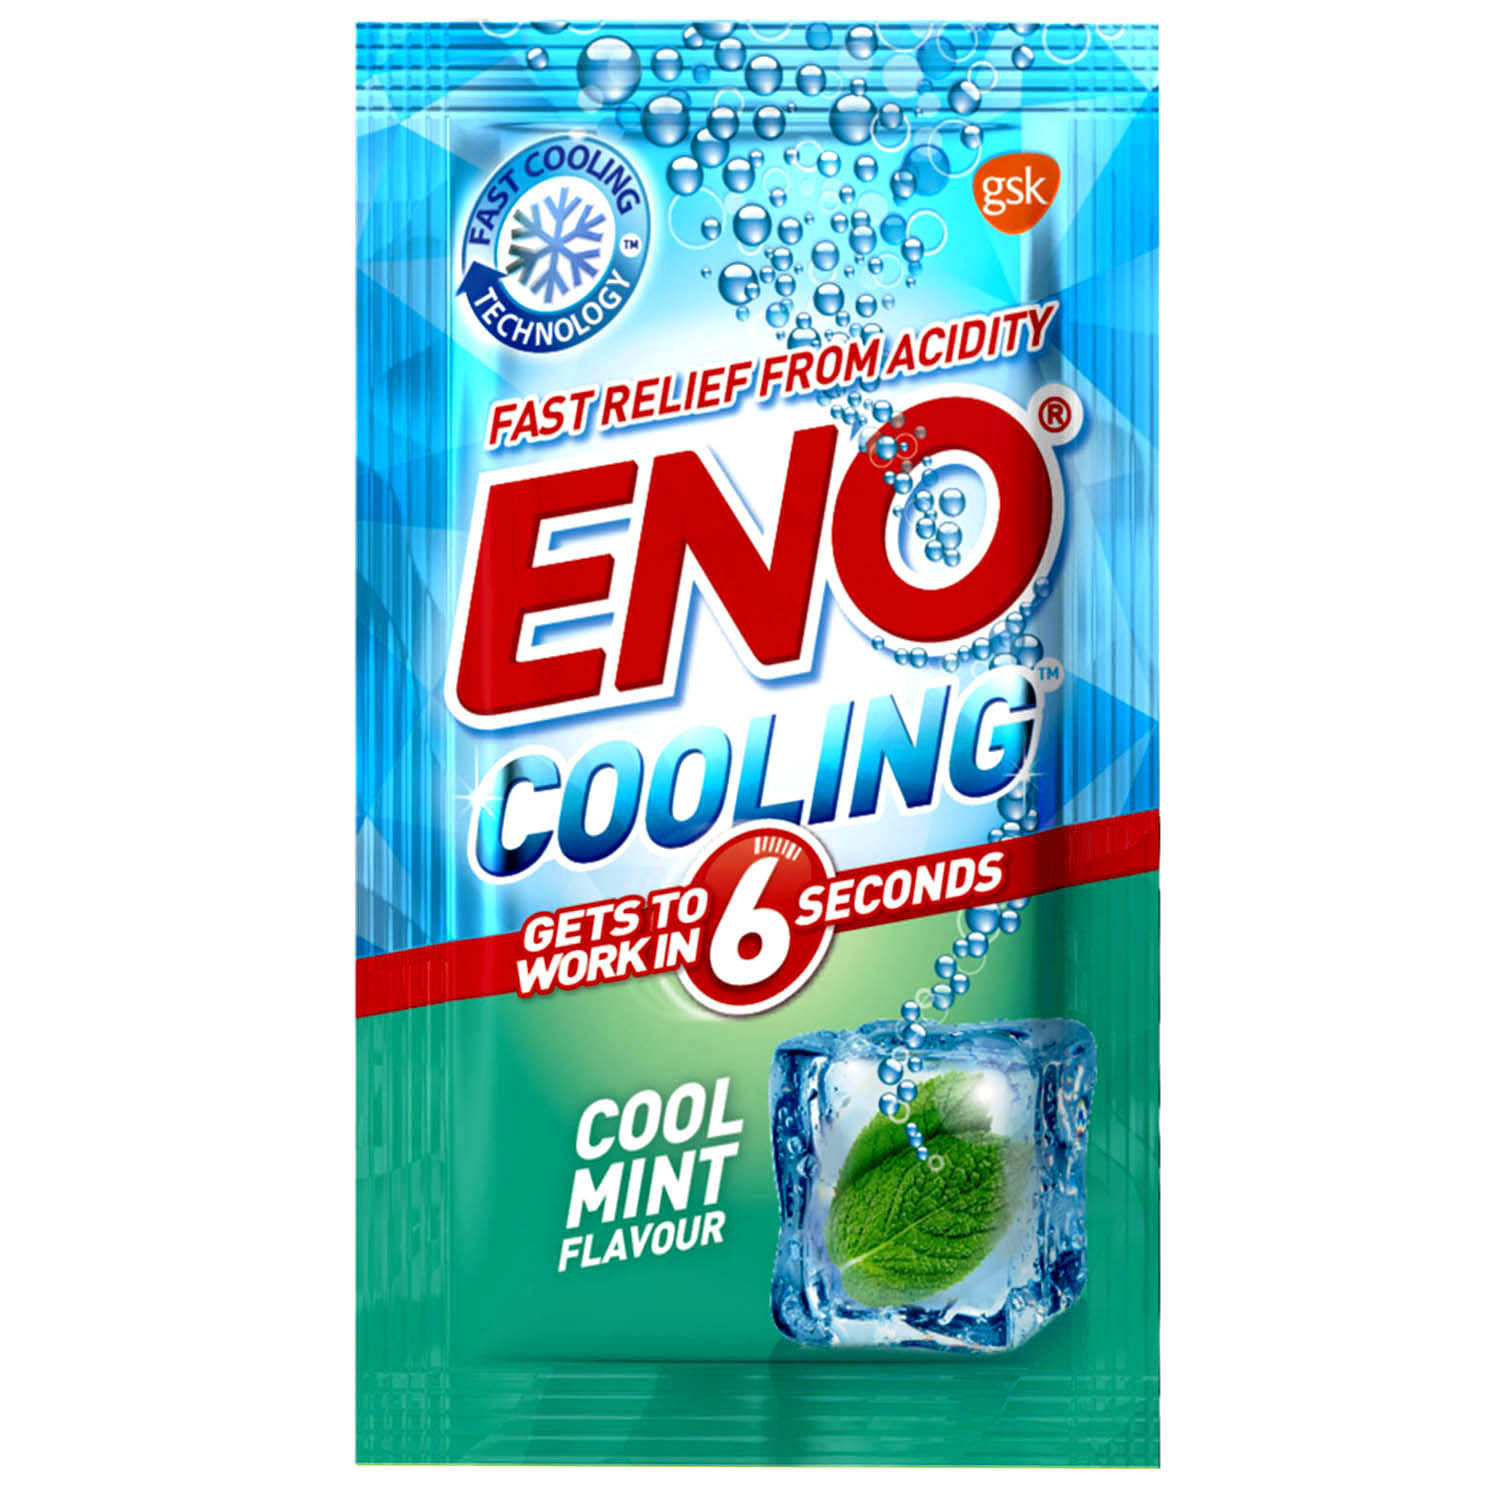 Buy Eno Cooling Cool Mint Flavour Powder, 5 gm Online